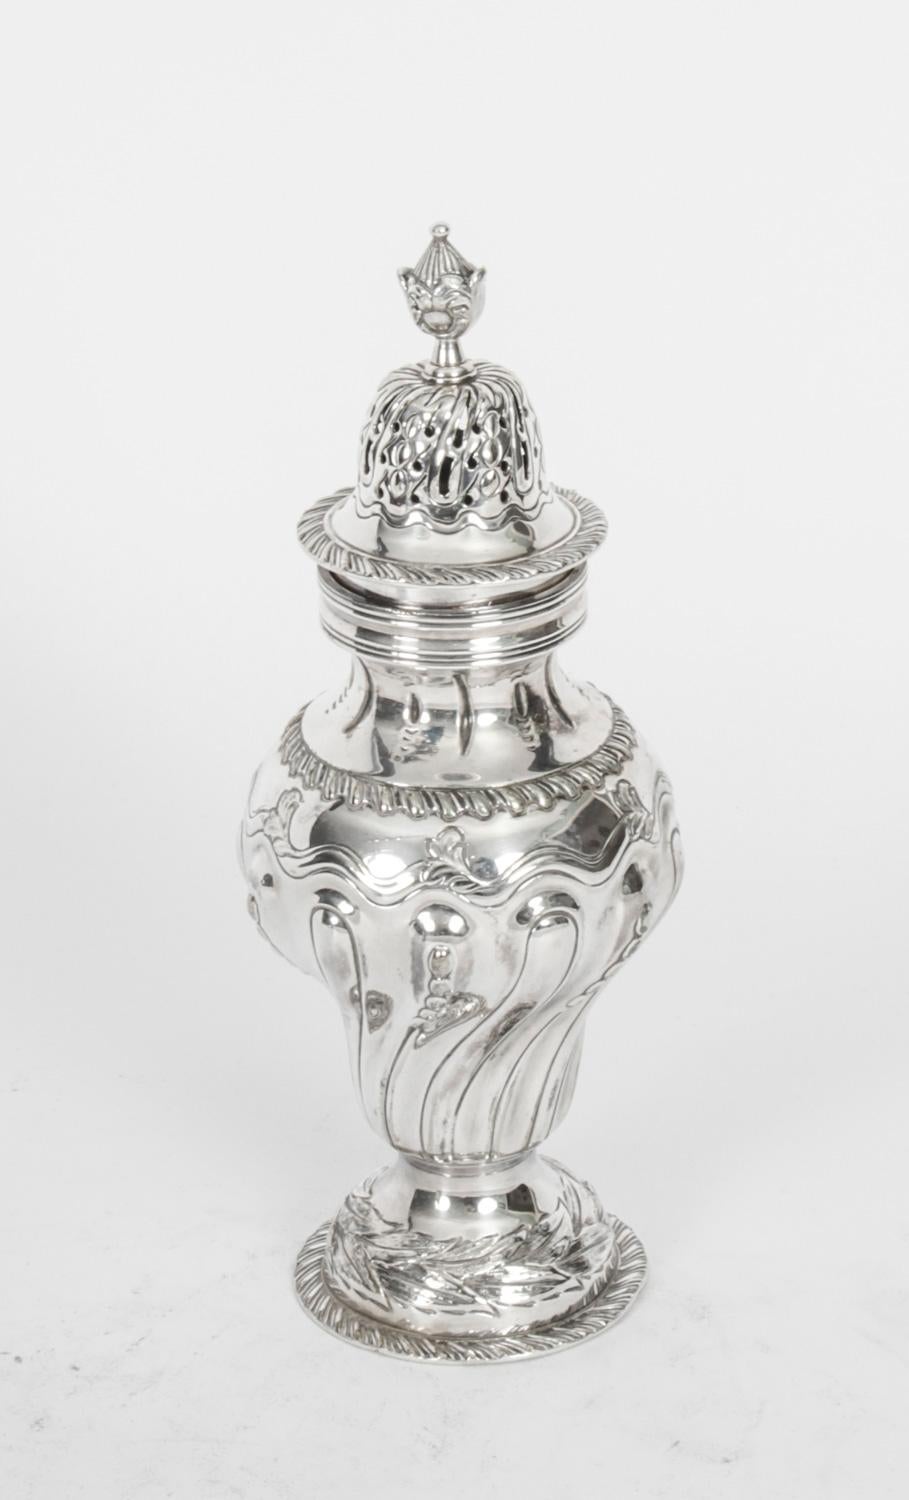 A large beautiful Victorian silver plated sugar caster made by William Batt & Sons Ltd, circa 1860 in date.
 
It features typical baluster form and is embossed with lavish decoration of lattice work and scrolls, the pierced pull-off lid with